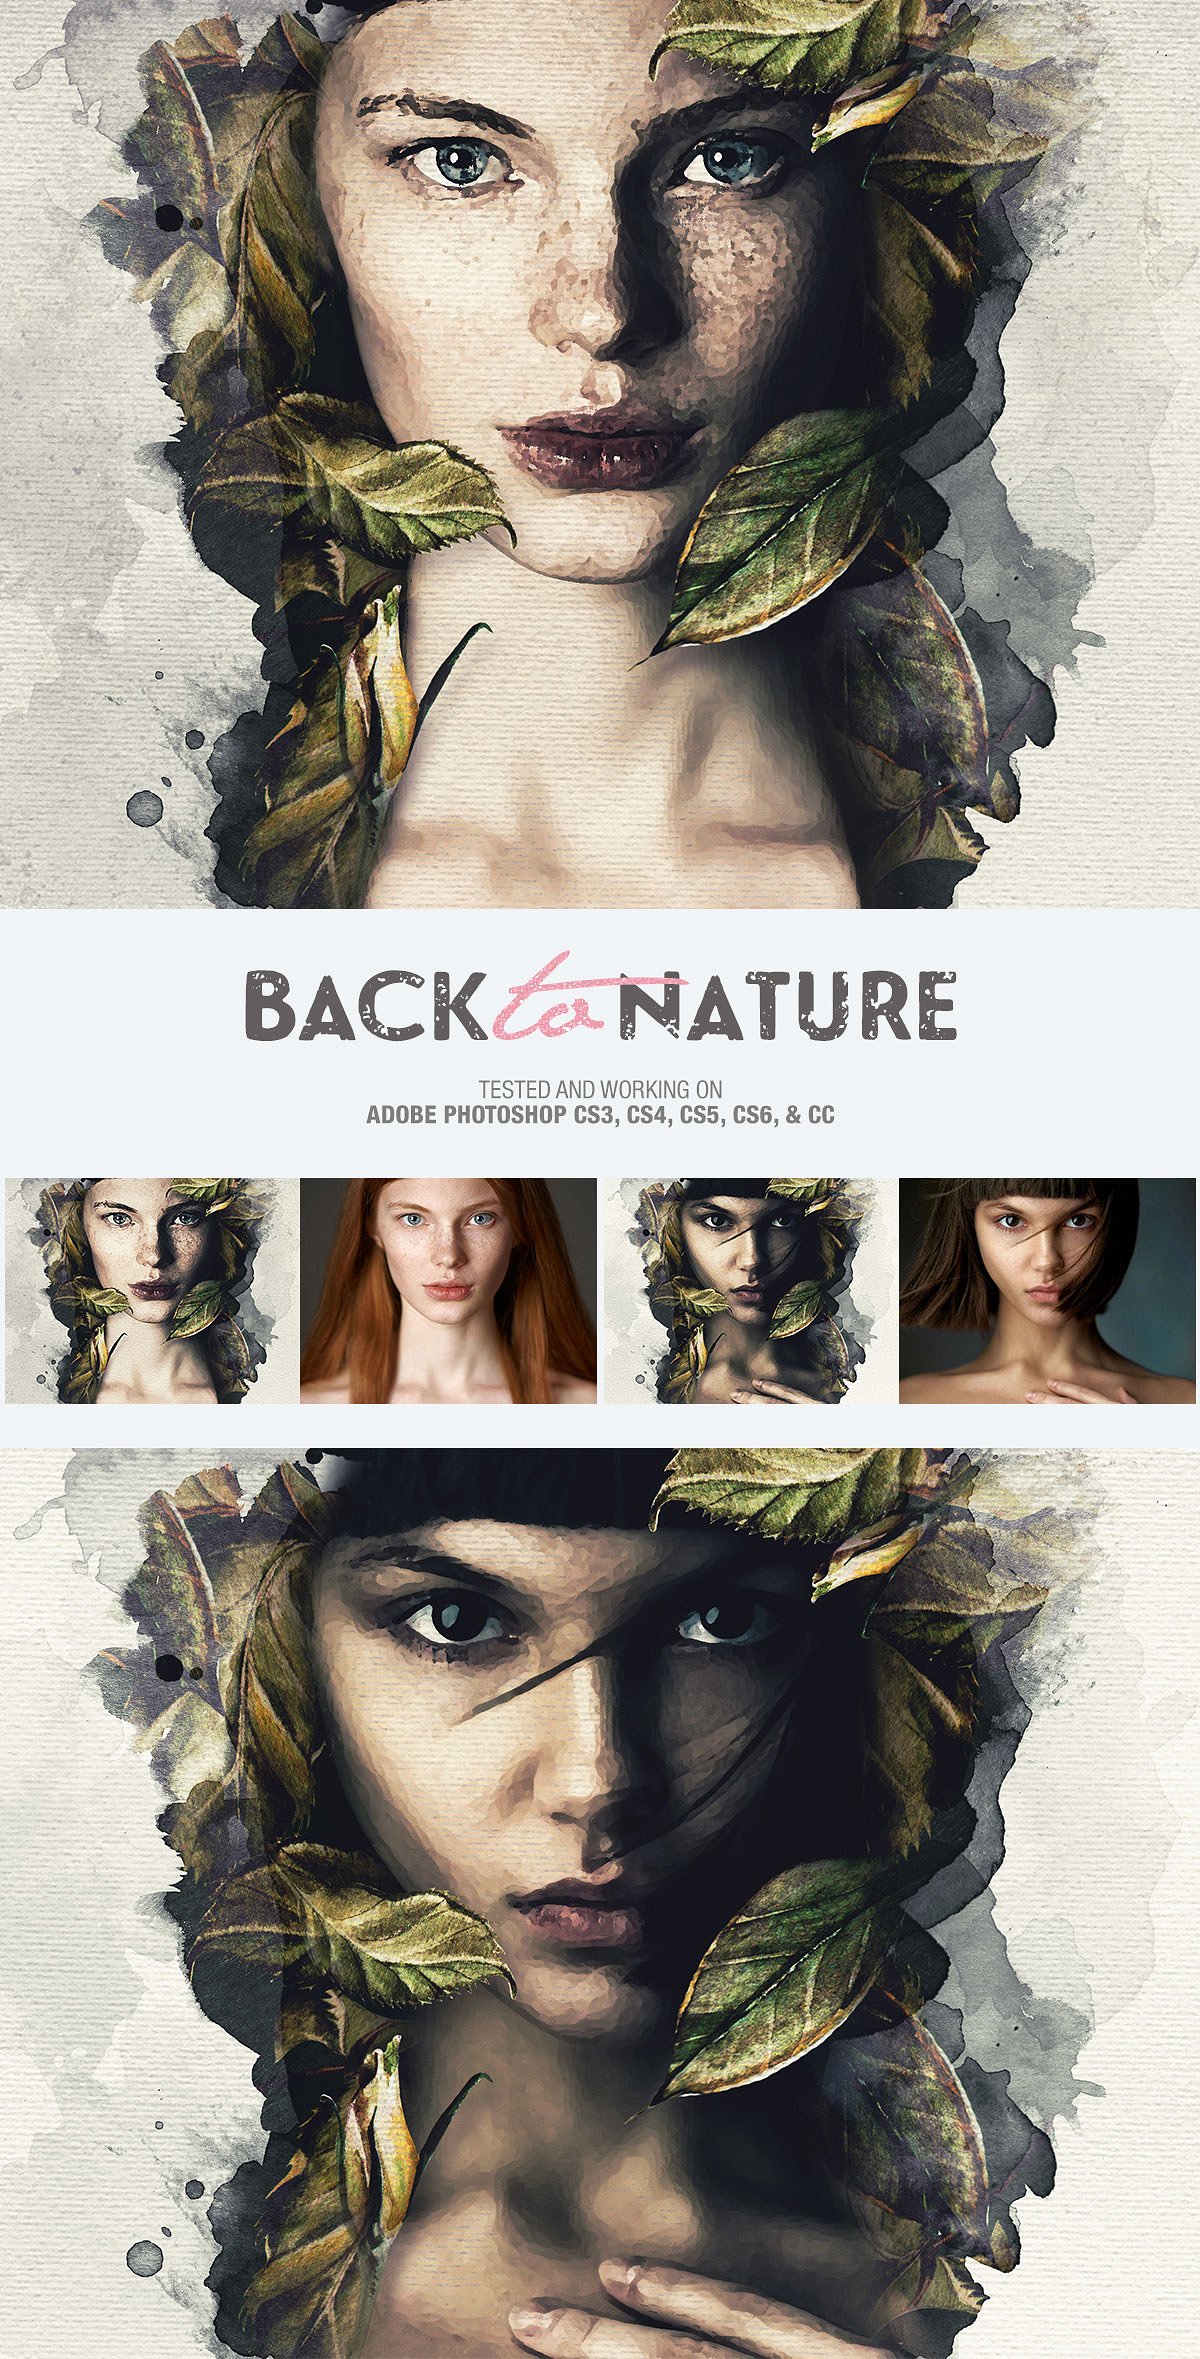 back-to-nature-photo-template-(design-by-amorjesu)-.jpg